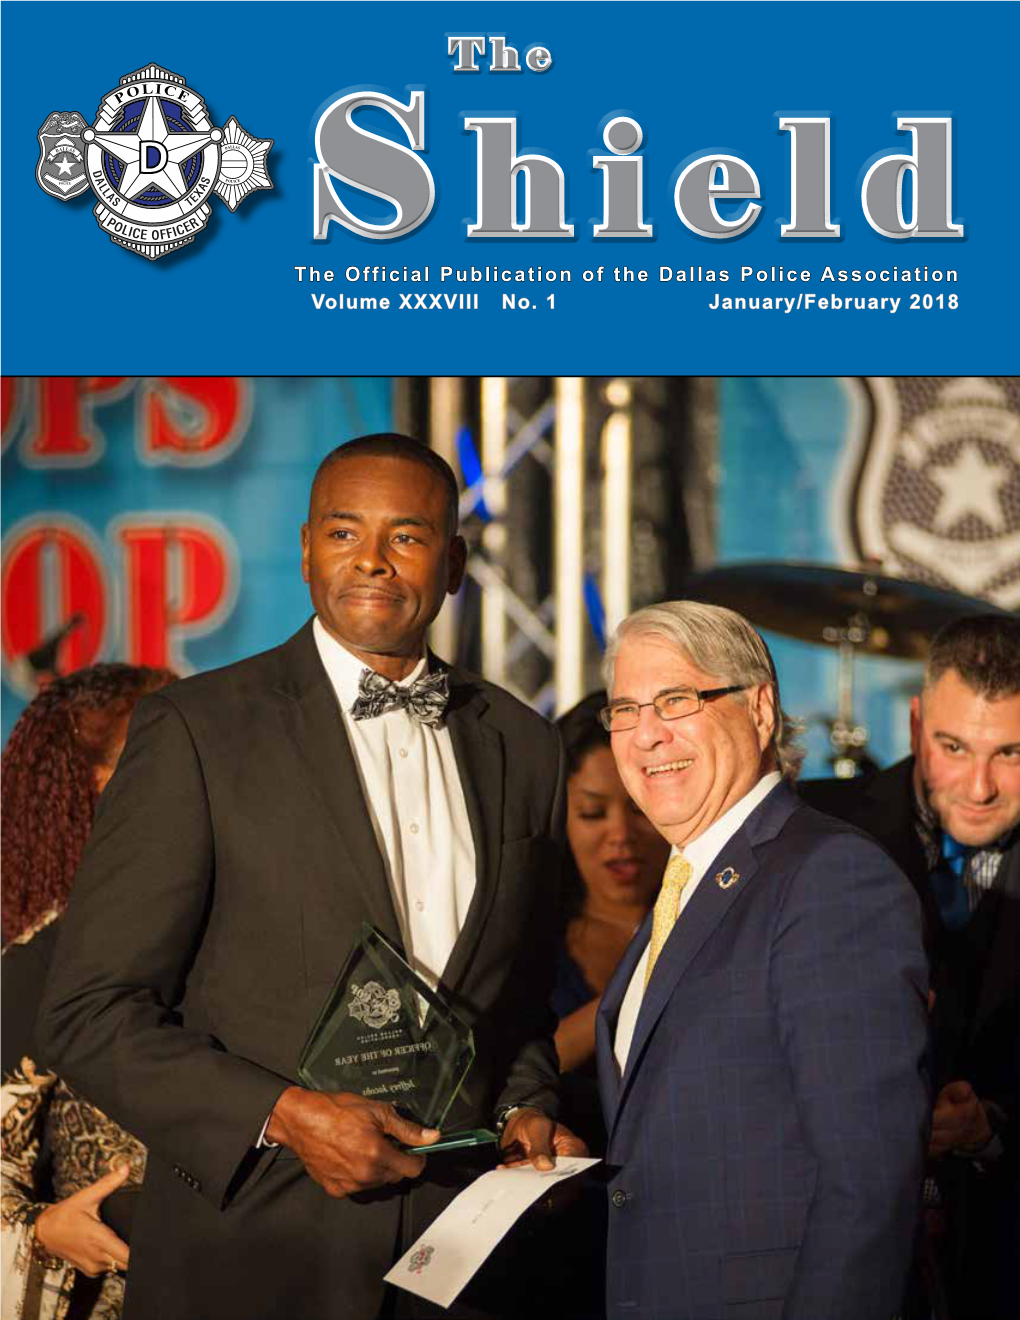 The Official Publication of the Dallas Police Association Volume XXXVIII No